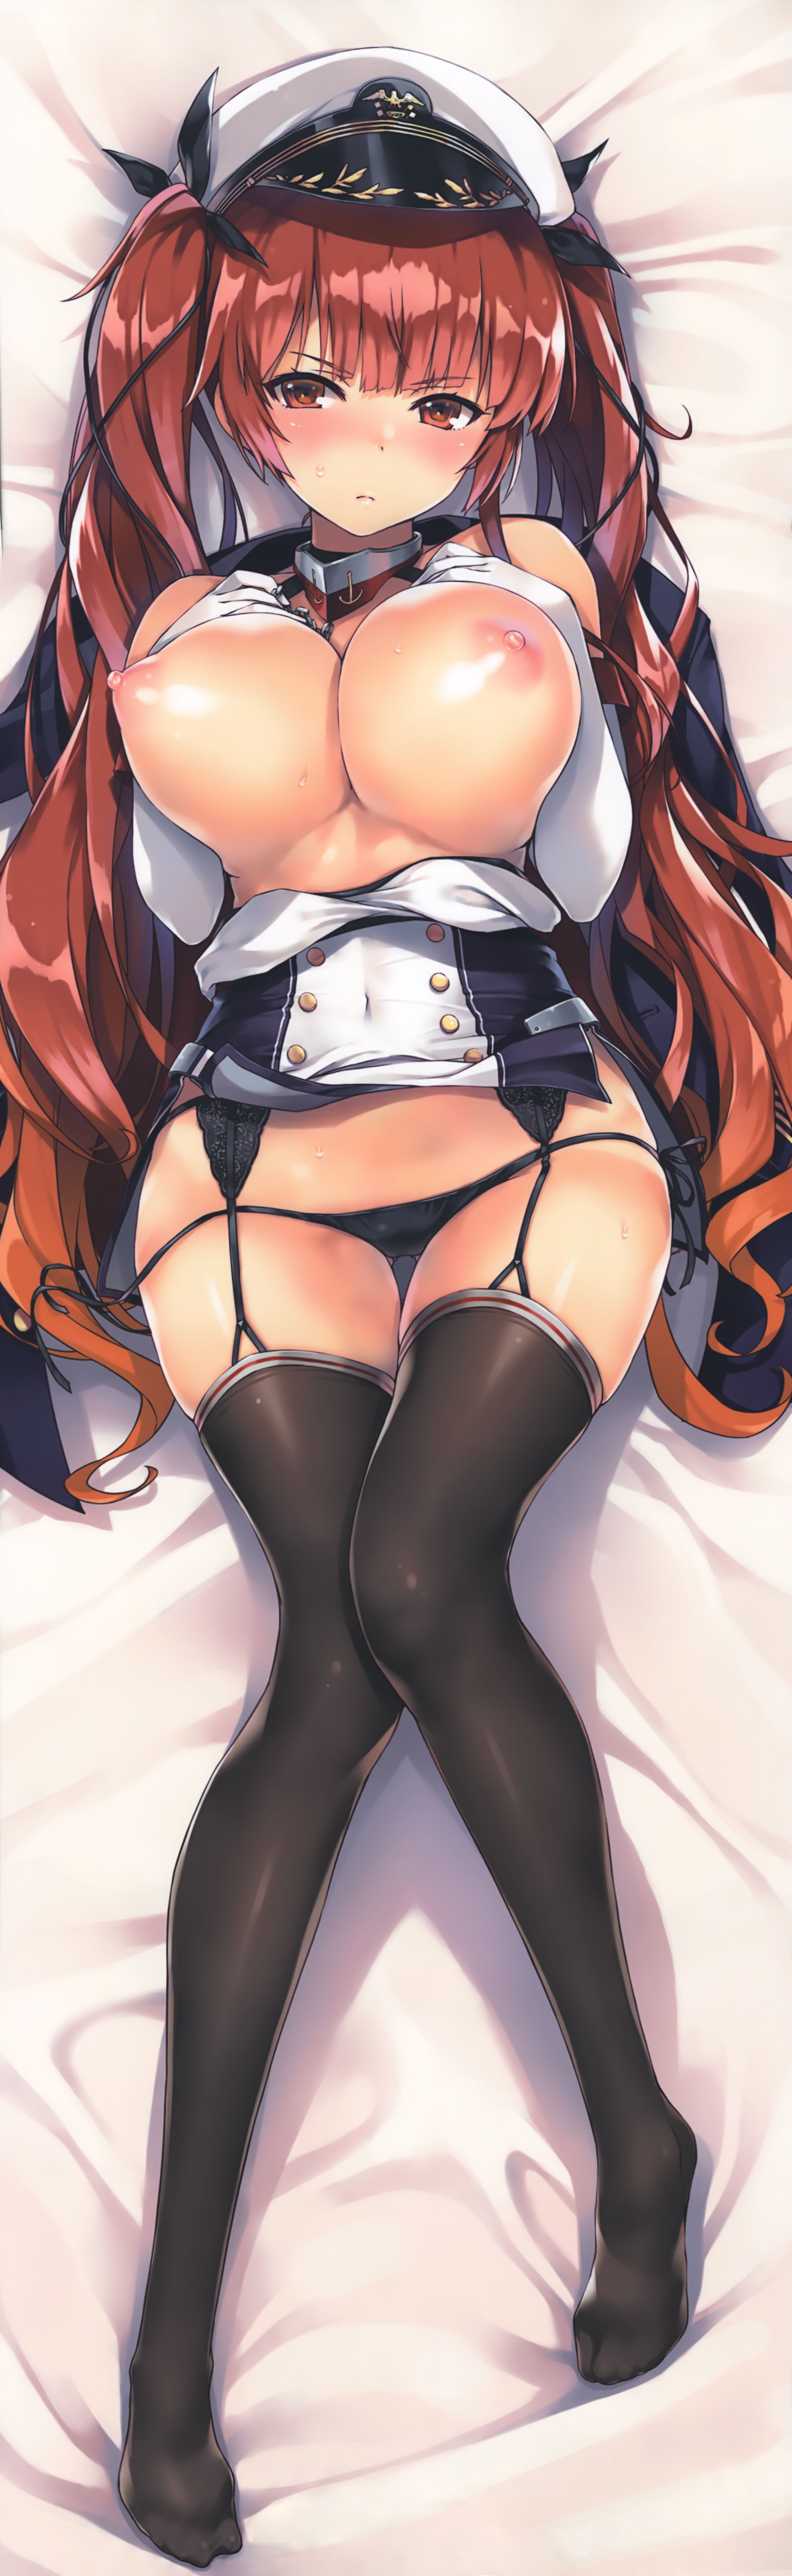 Erotic anime summary erotic image collection of beautiful girls wearing a garter belt [50 sheets] 40